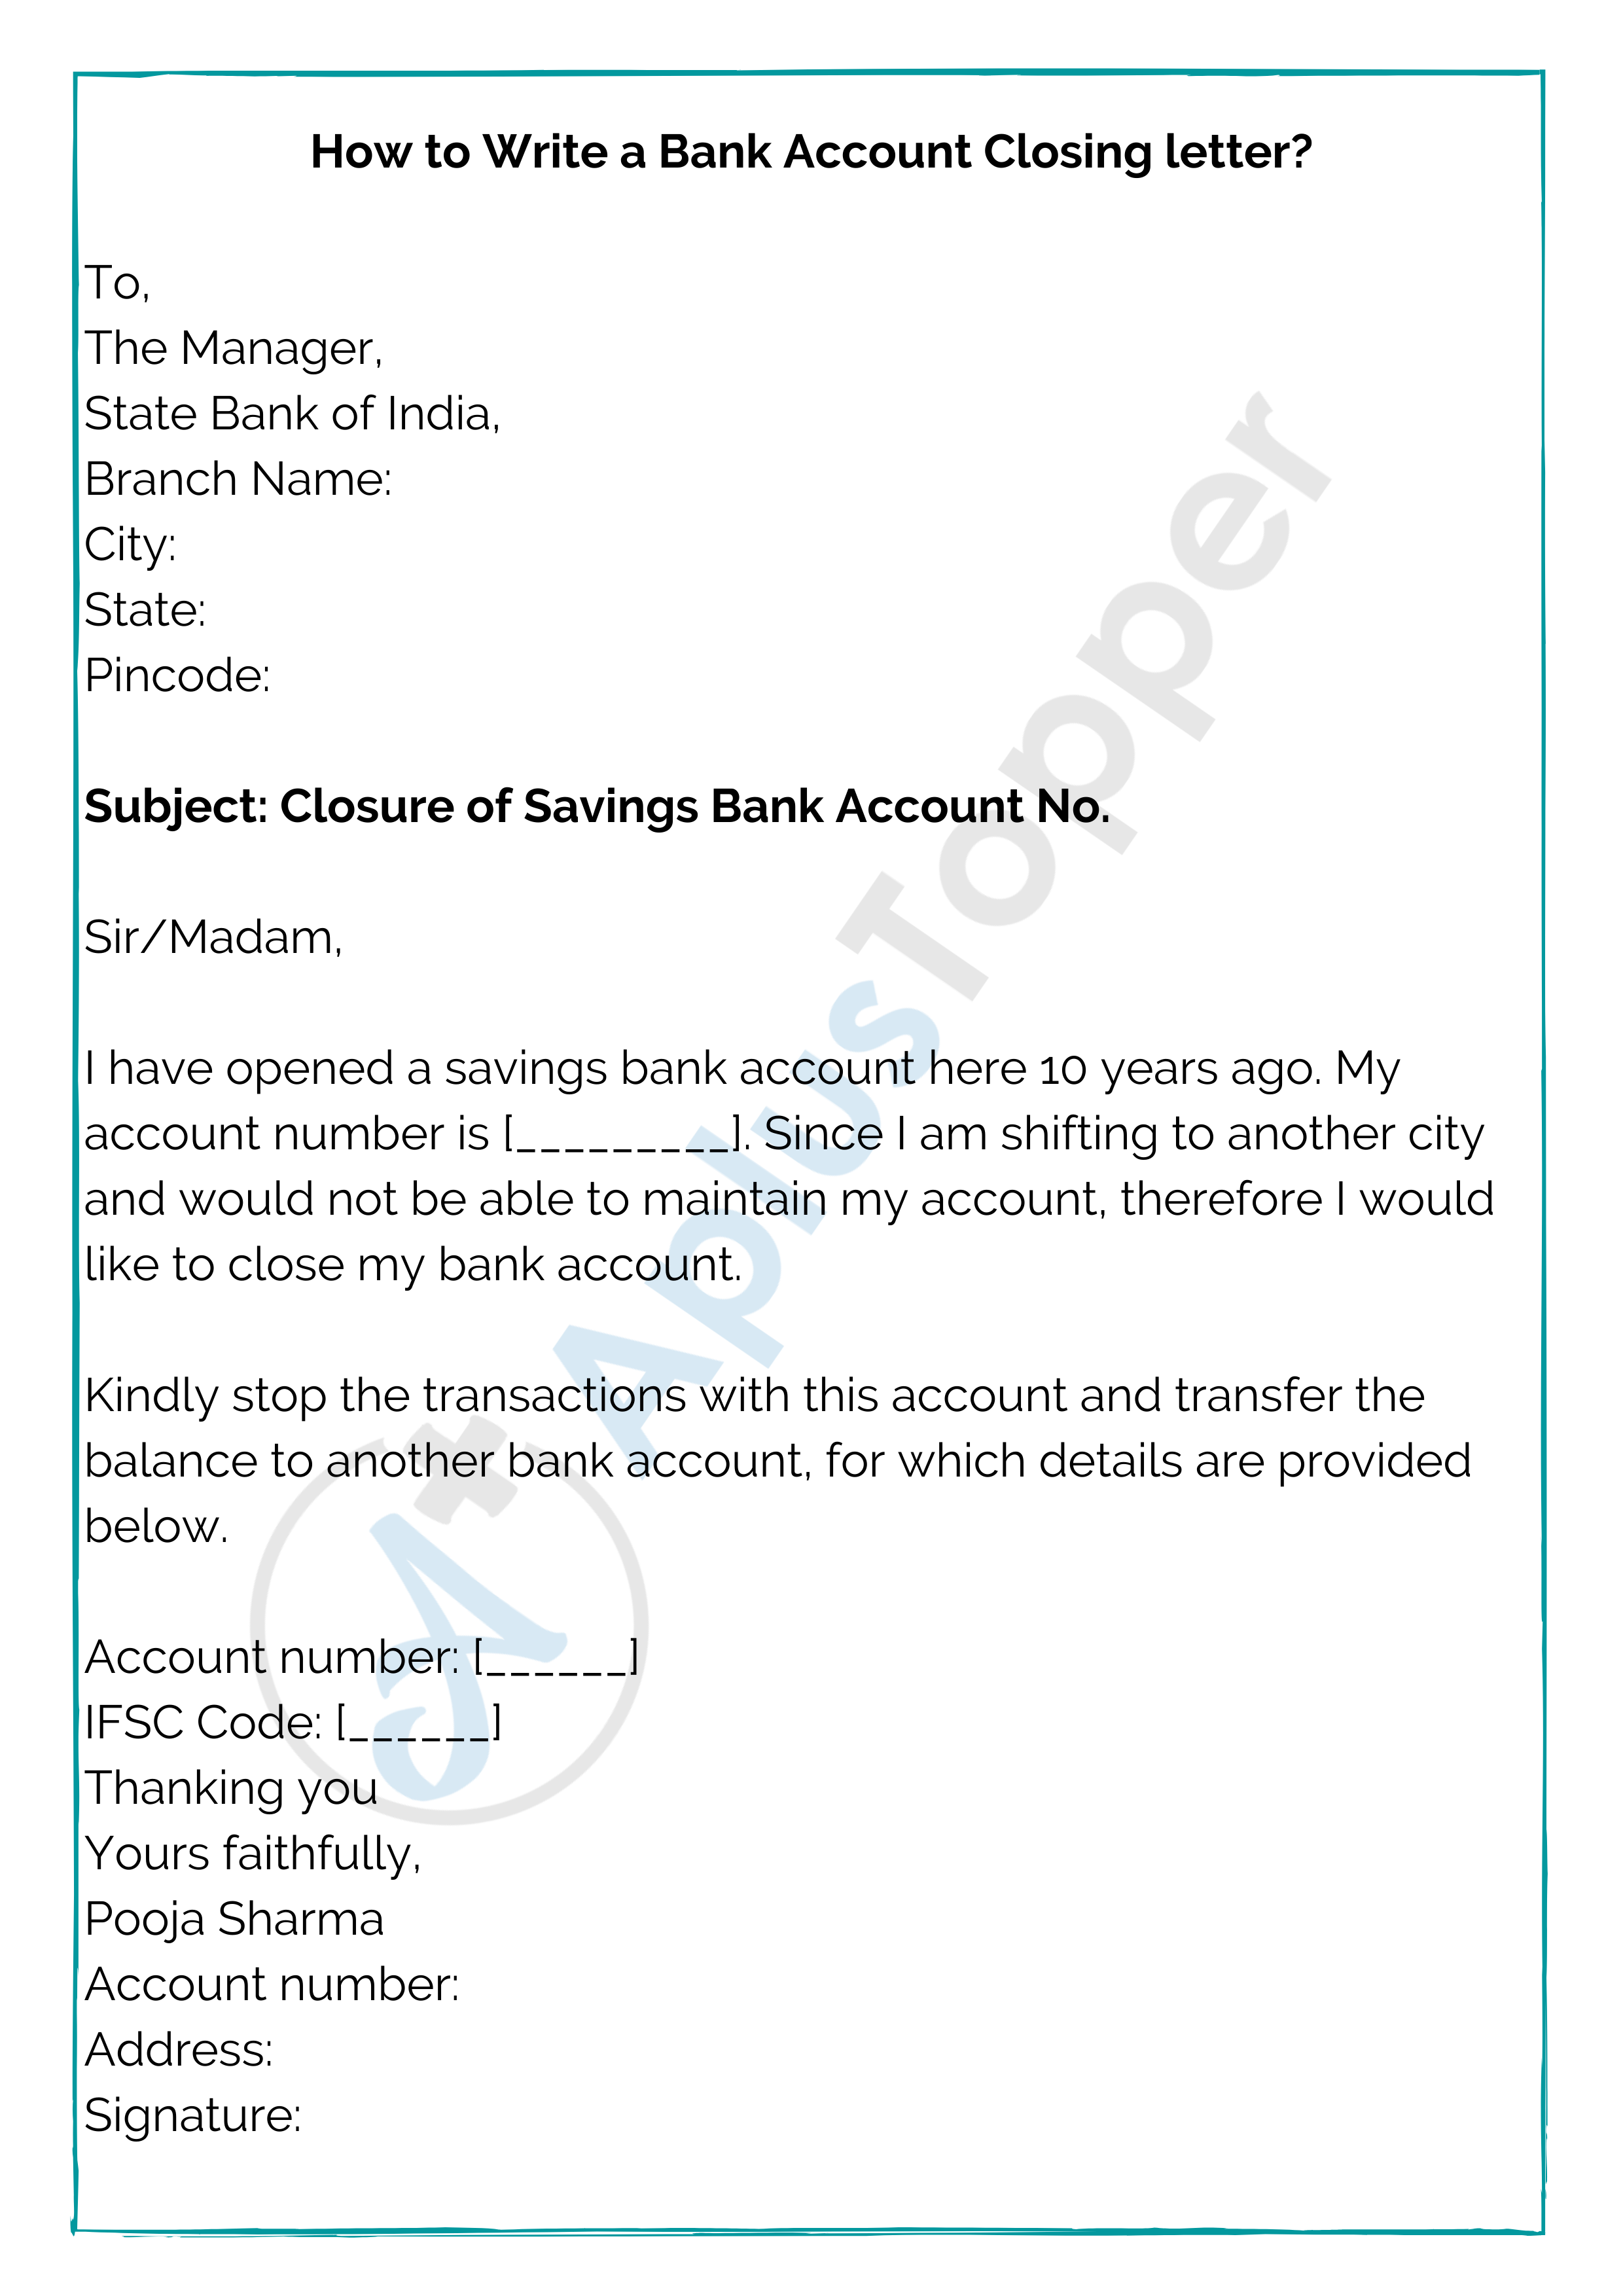 Bank Account Closing Letter  Format, Sample and How to Write a For Account Closure Letter Template